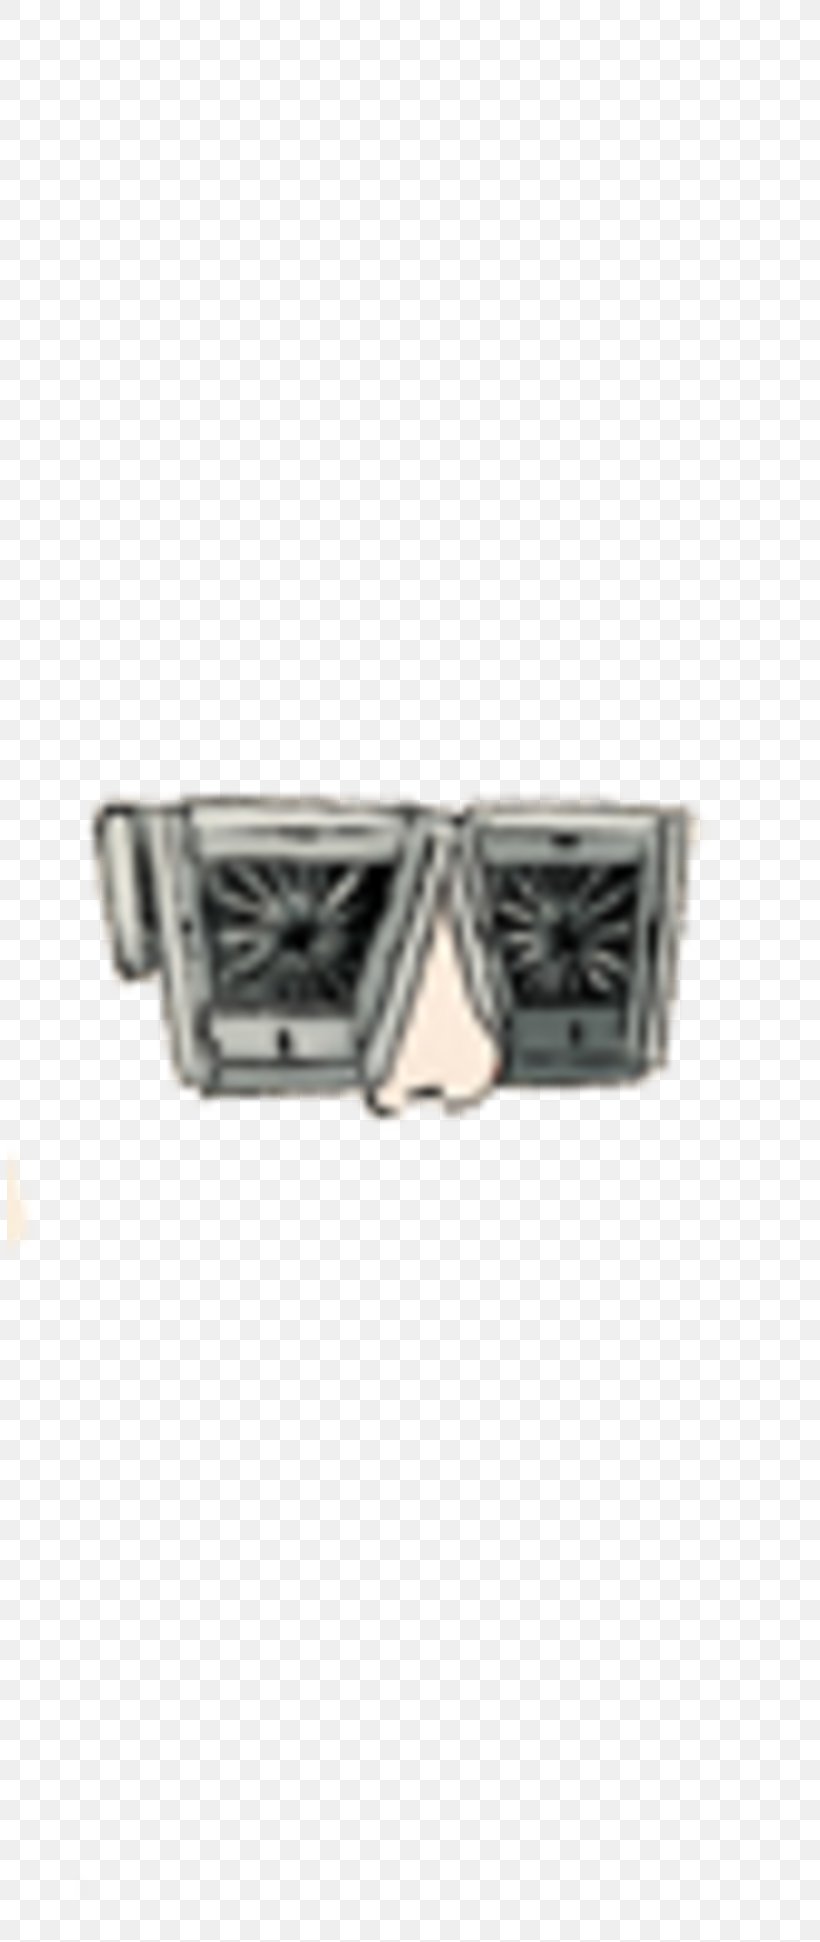 Belt Buckles Clothing Accessories Jewellery Silver, PNG, 806x1942px, Belt Buckles, Belt, Belt Buckle, Bracelet, Buckle Download Free